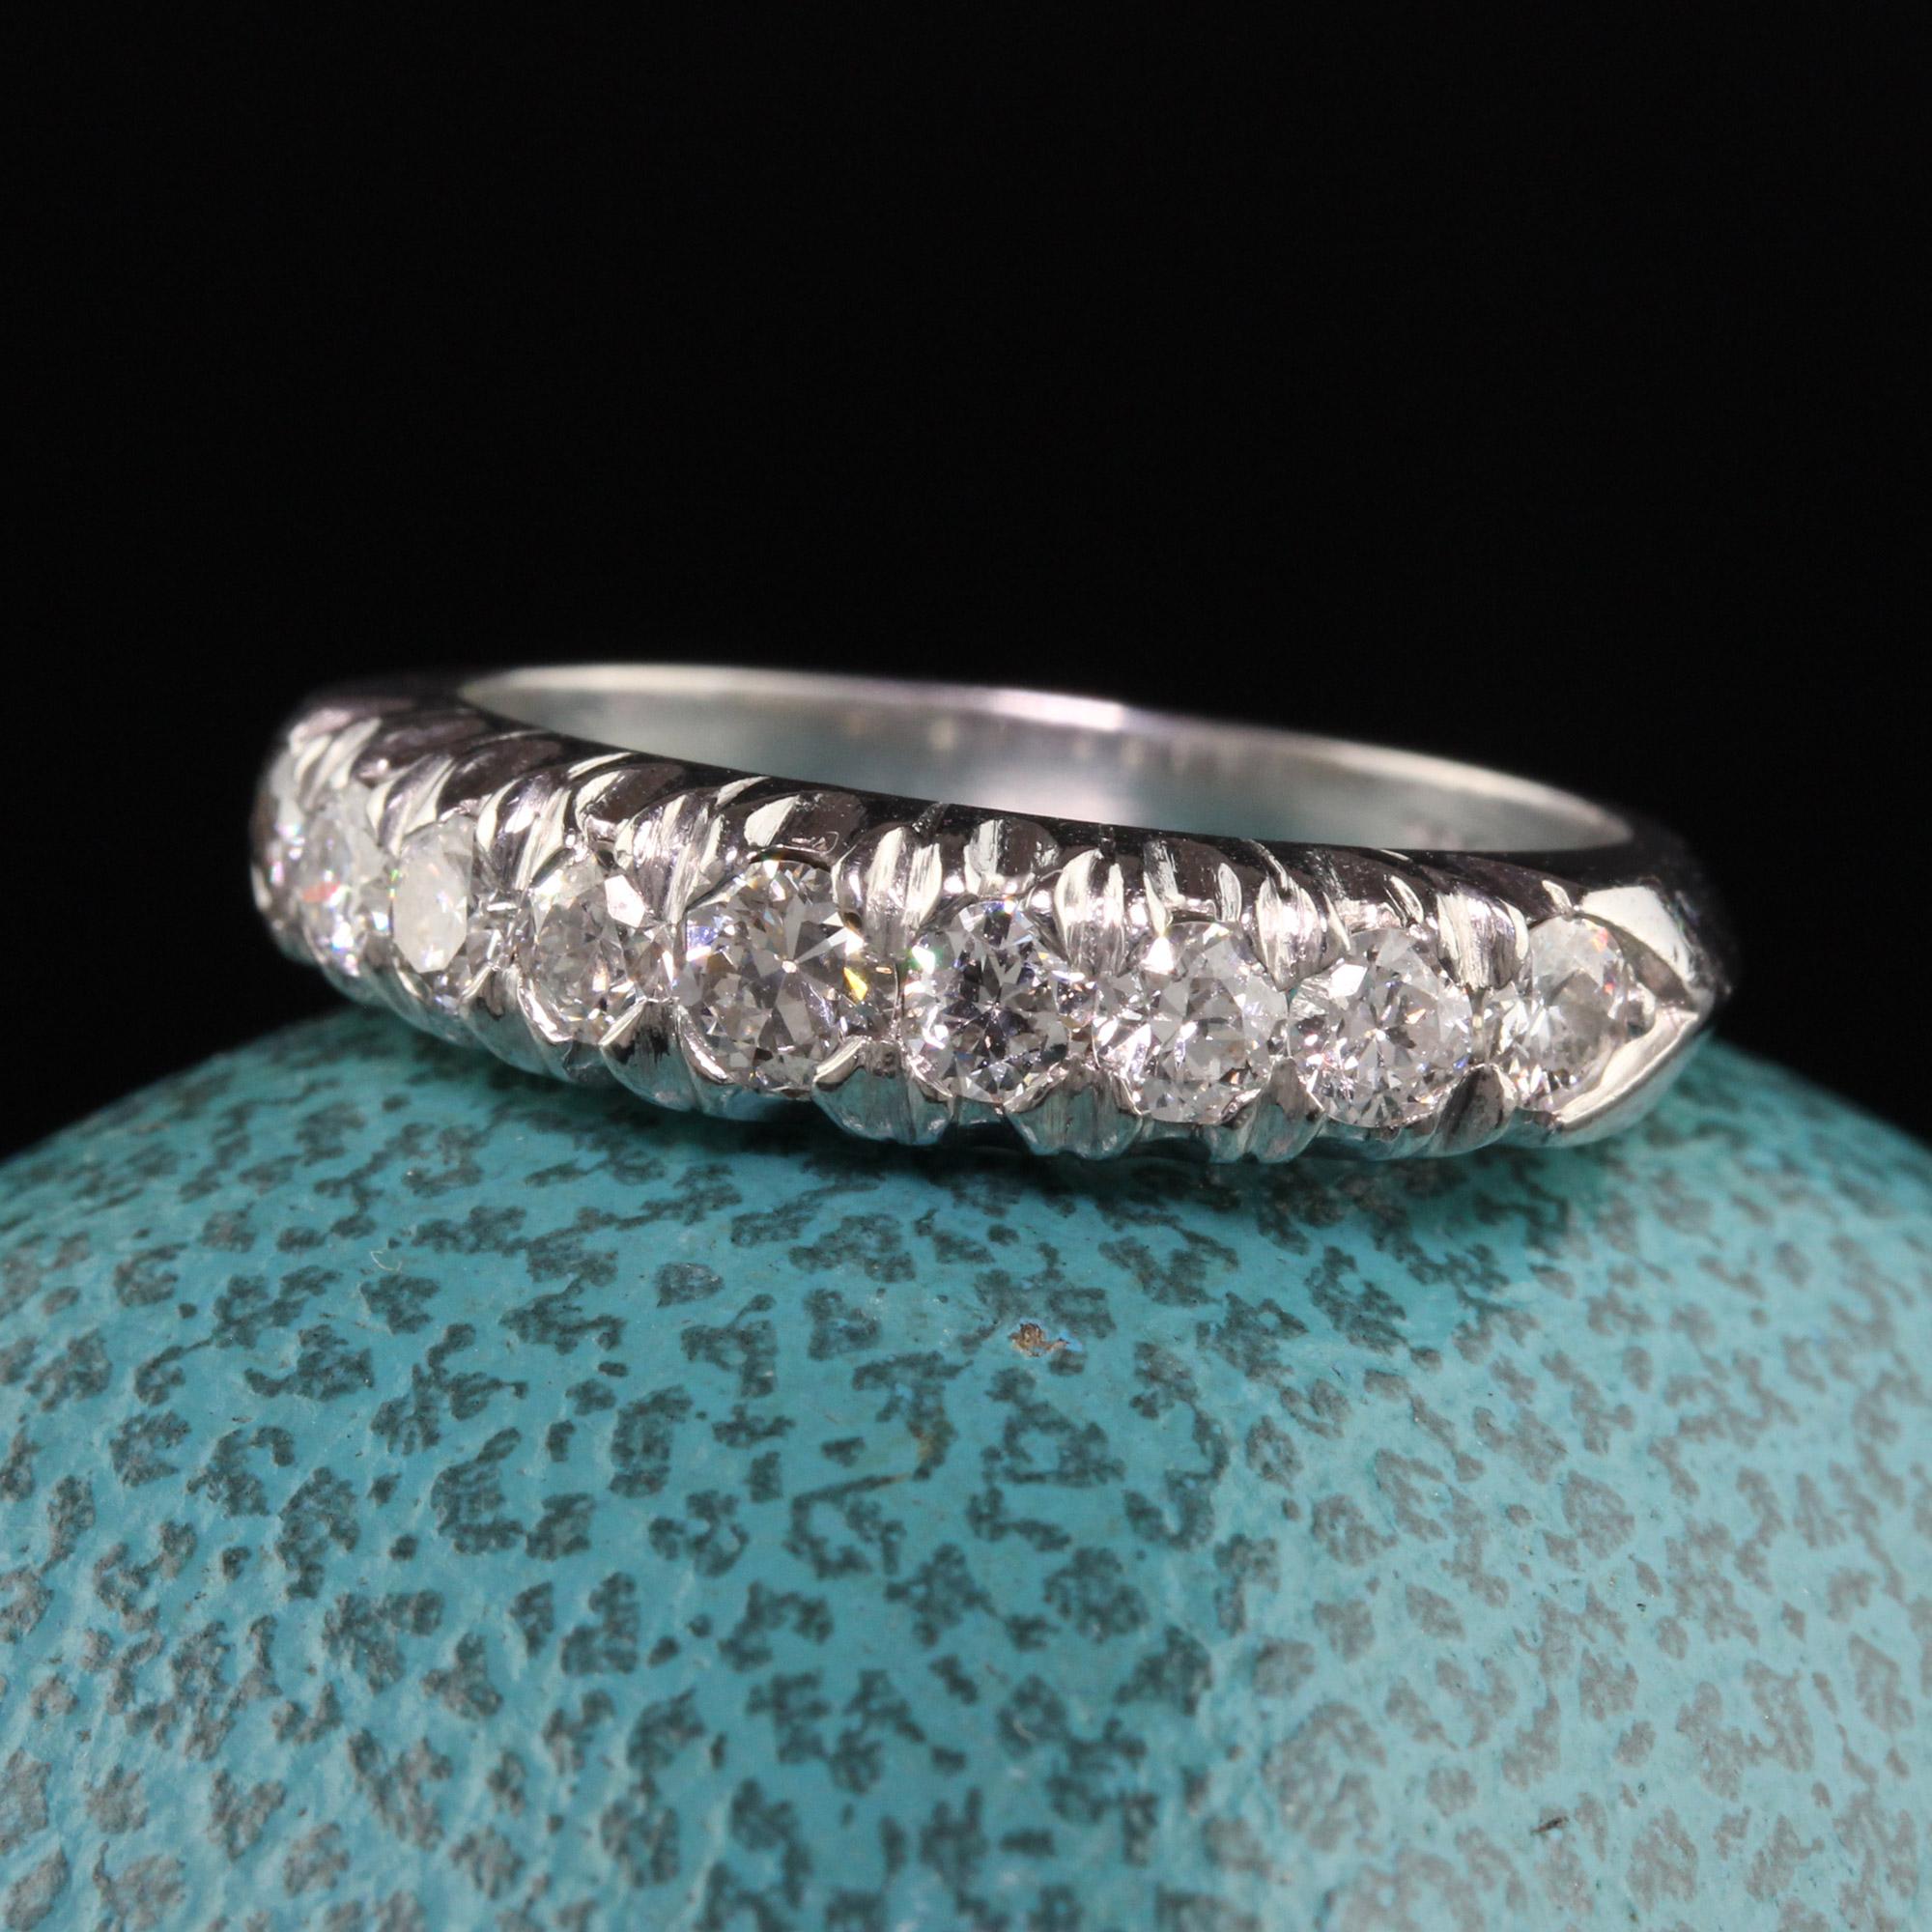 Beautiful Antique Art Deco Platinum Old European Cut Diamond Wedding Band. This gorgeous Art Deco band is crafted in platinum and has old european cut diamonds on the top of the band and the band is a knife edge design.

Item #R1199

Metal: